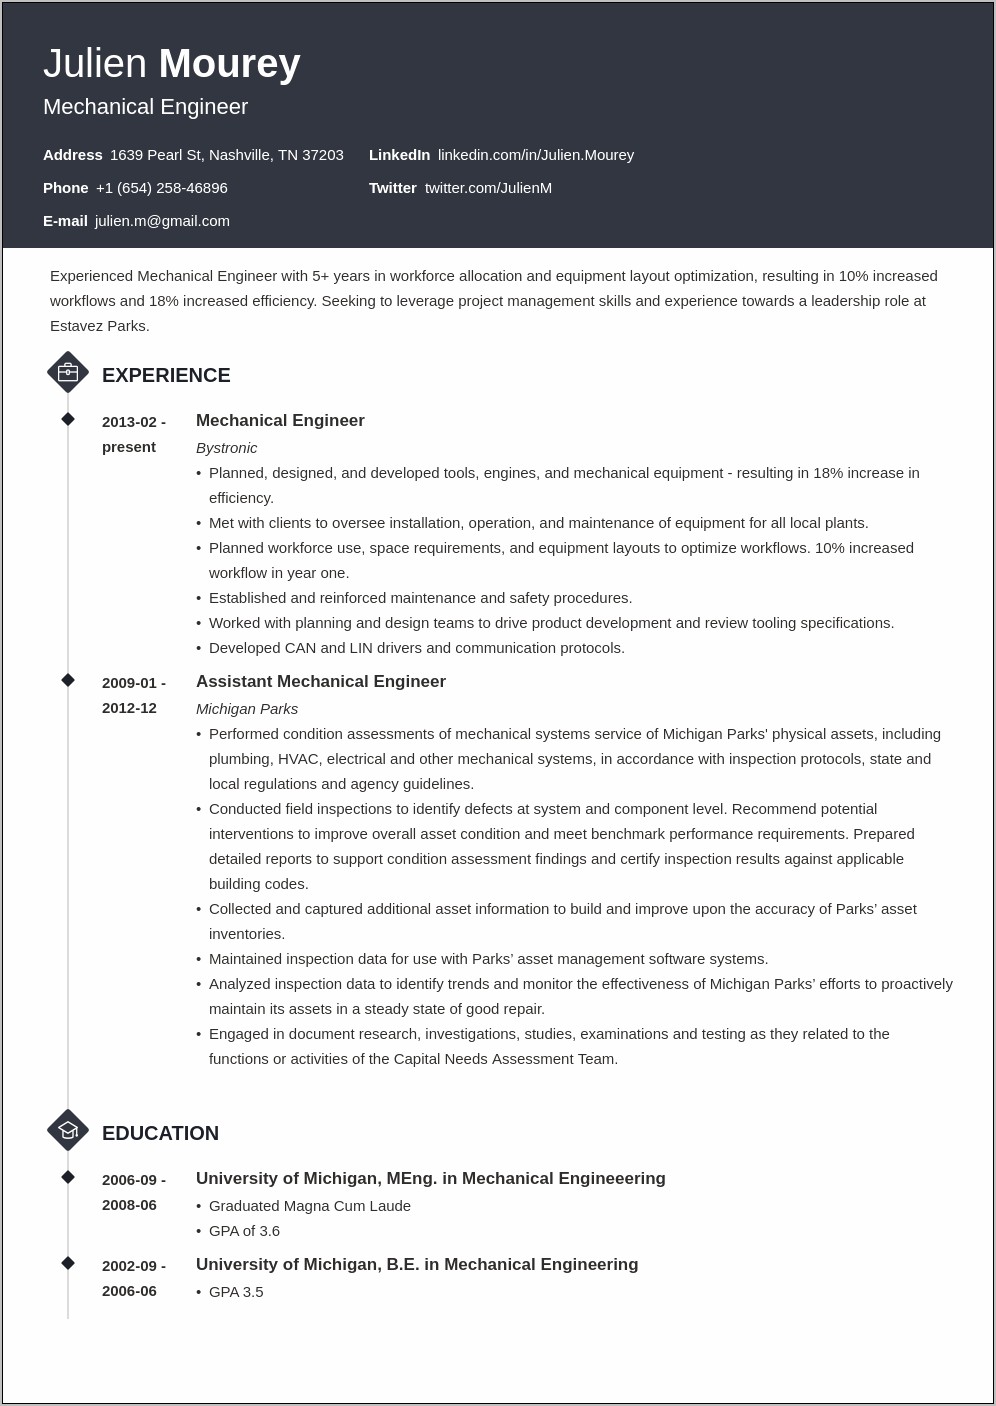 Engineering Maintenance Experience Description For Resume